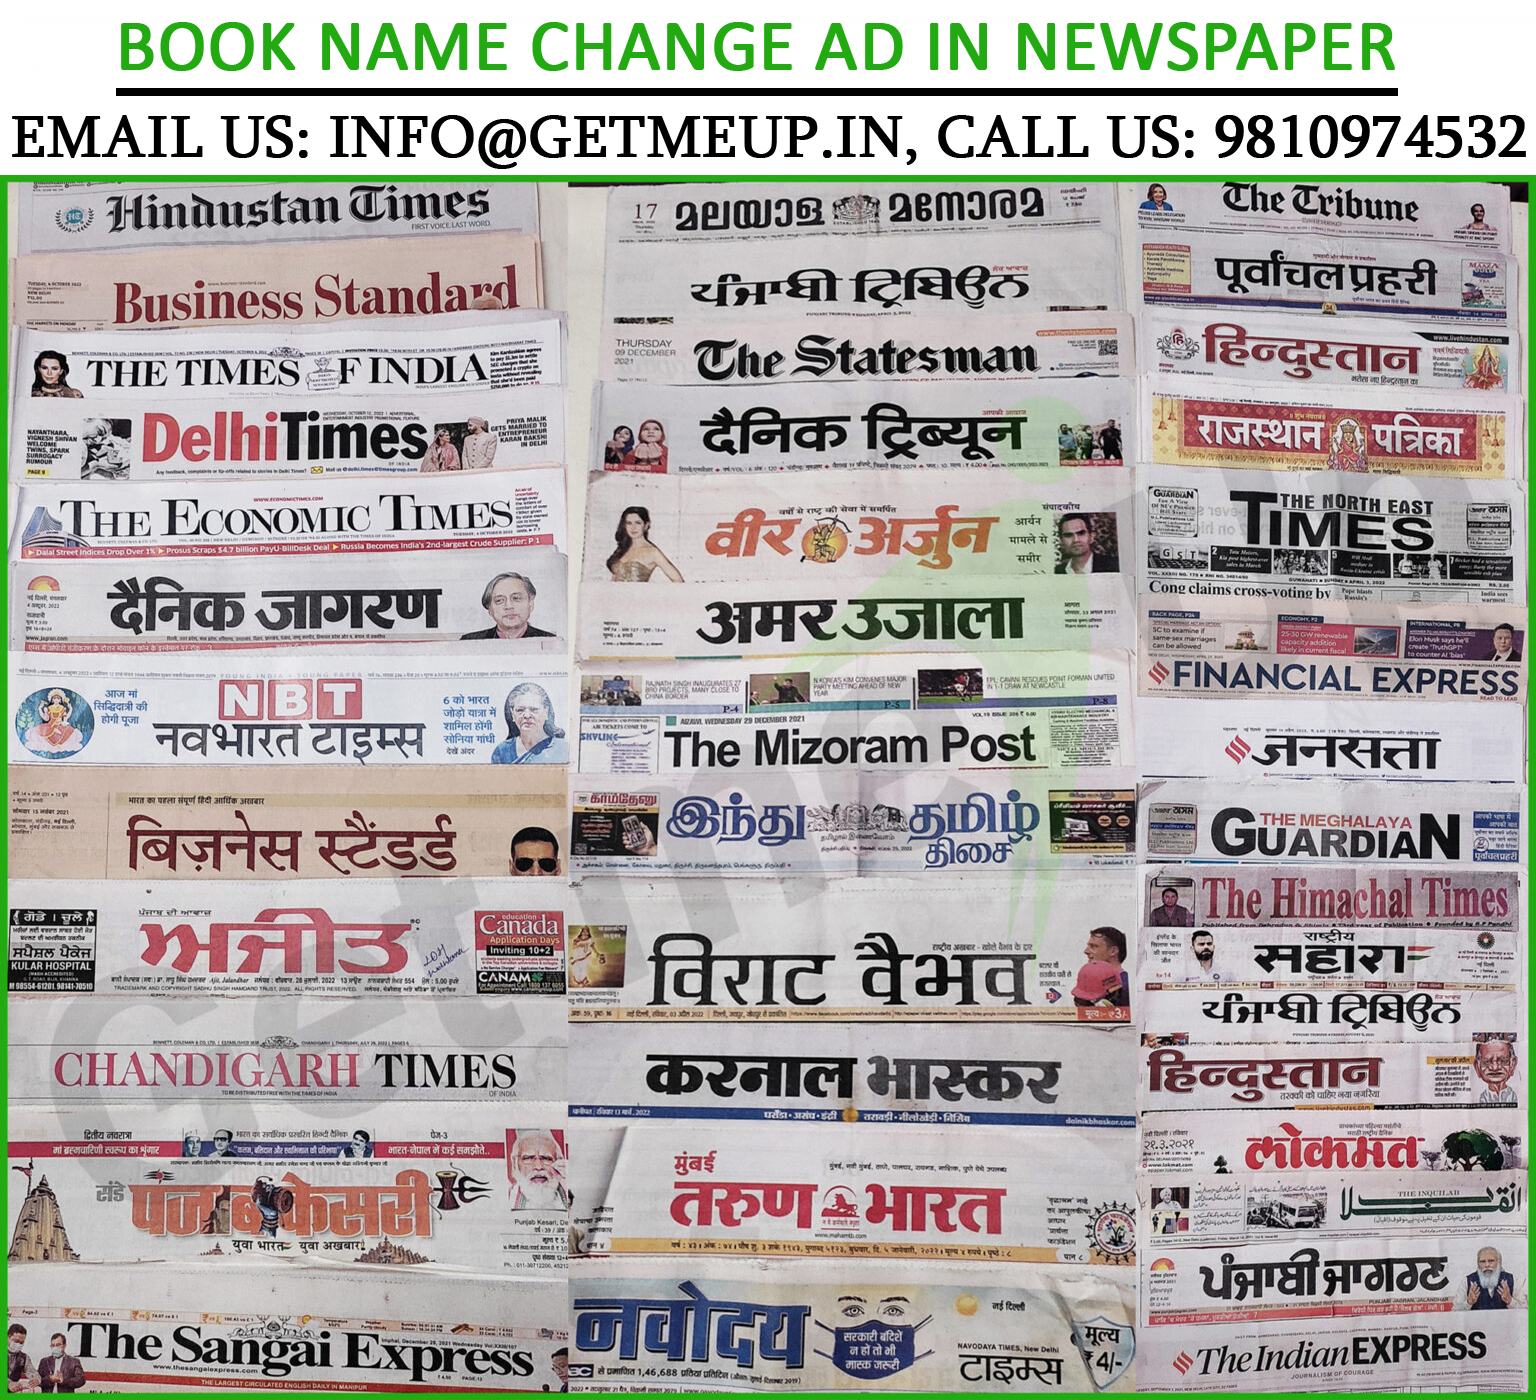 Book Name Change Ad in Newspaper 1